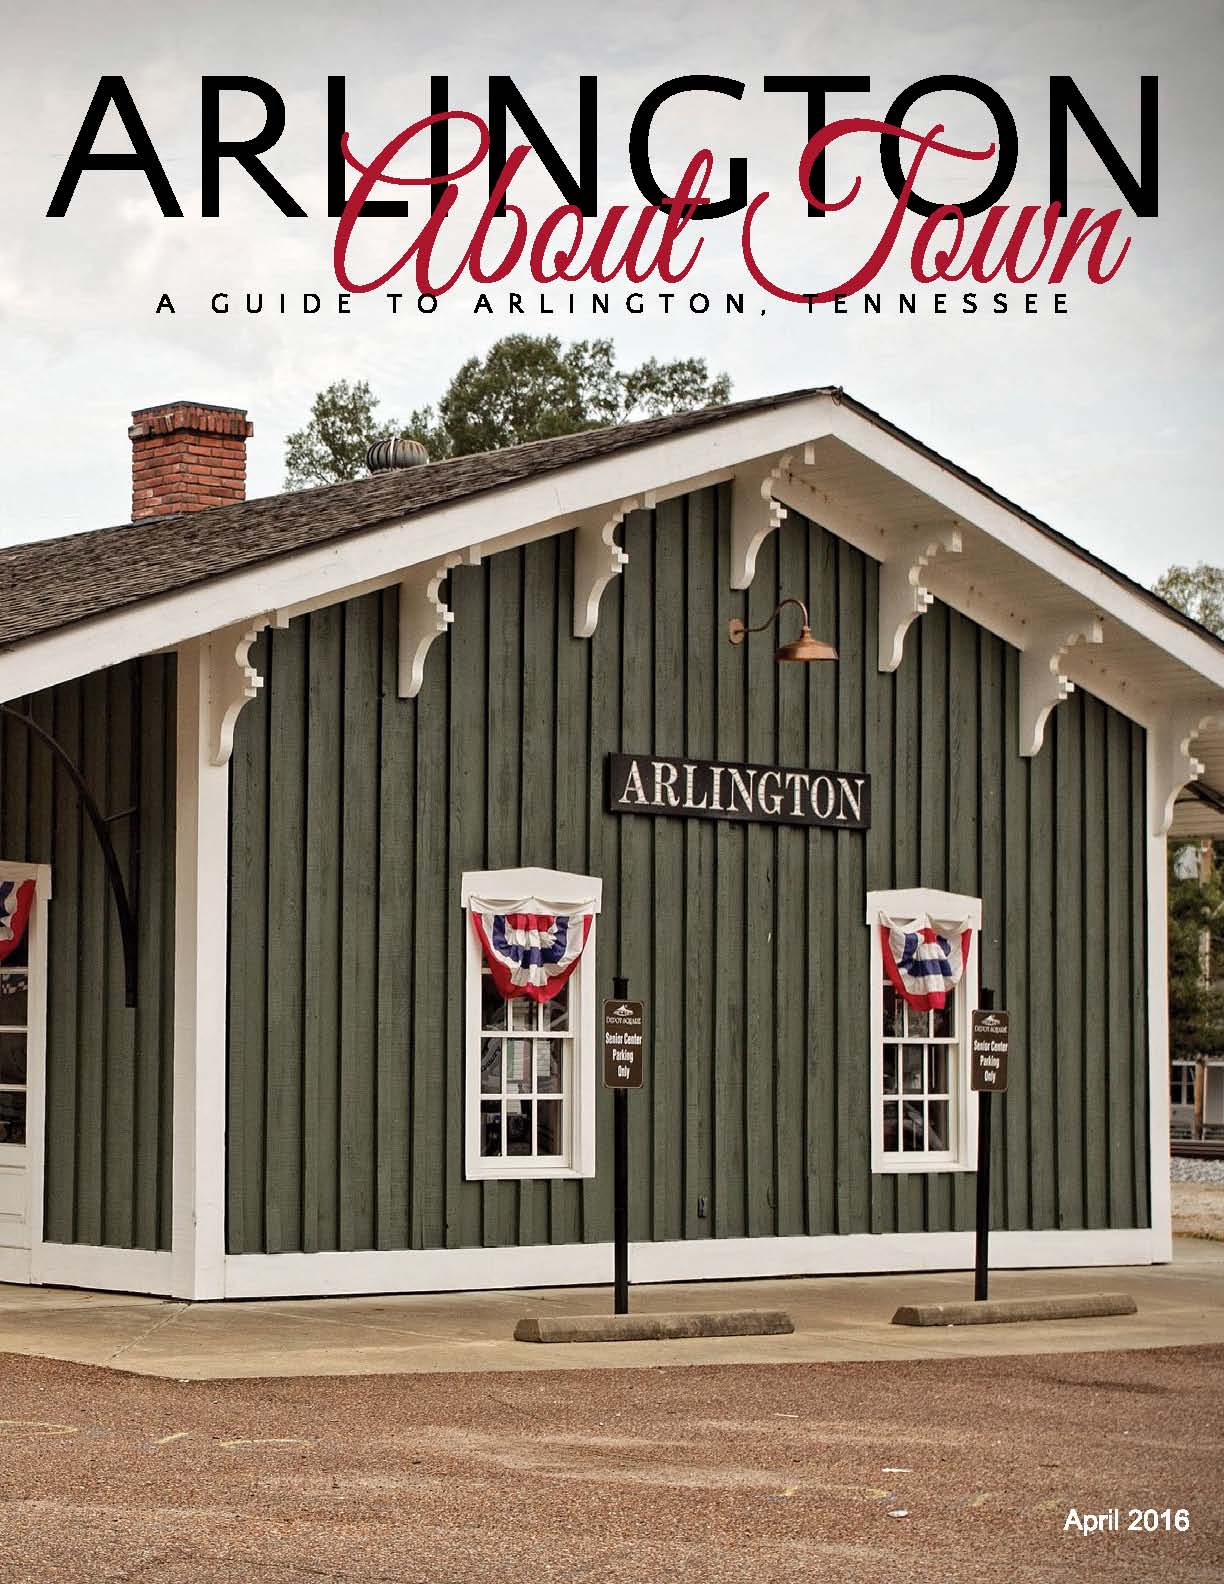 Arlington About Town Guide-cover